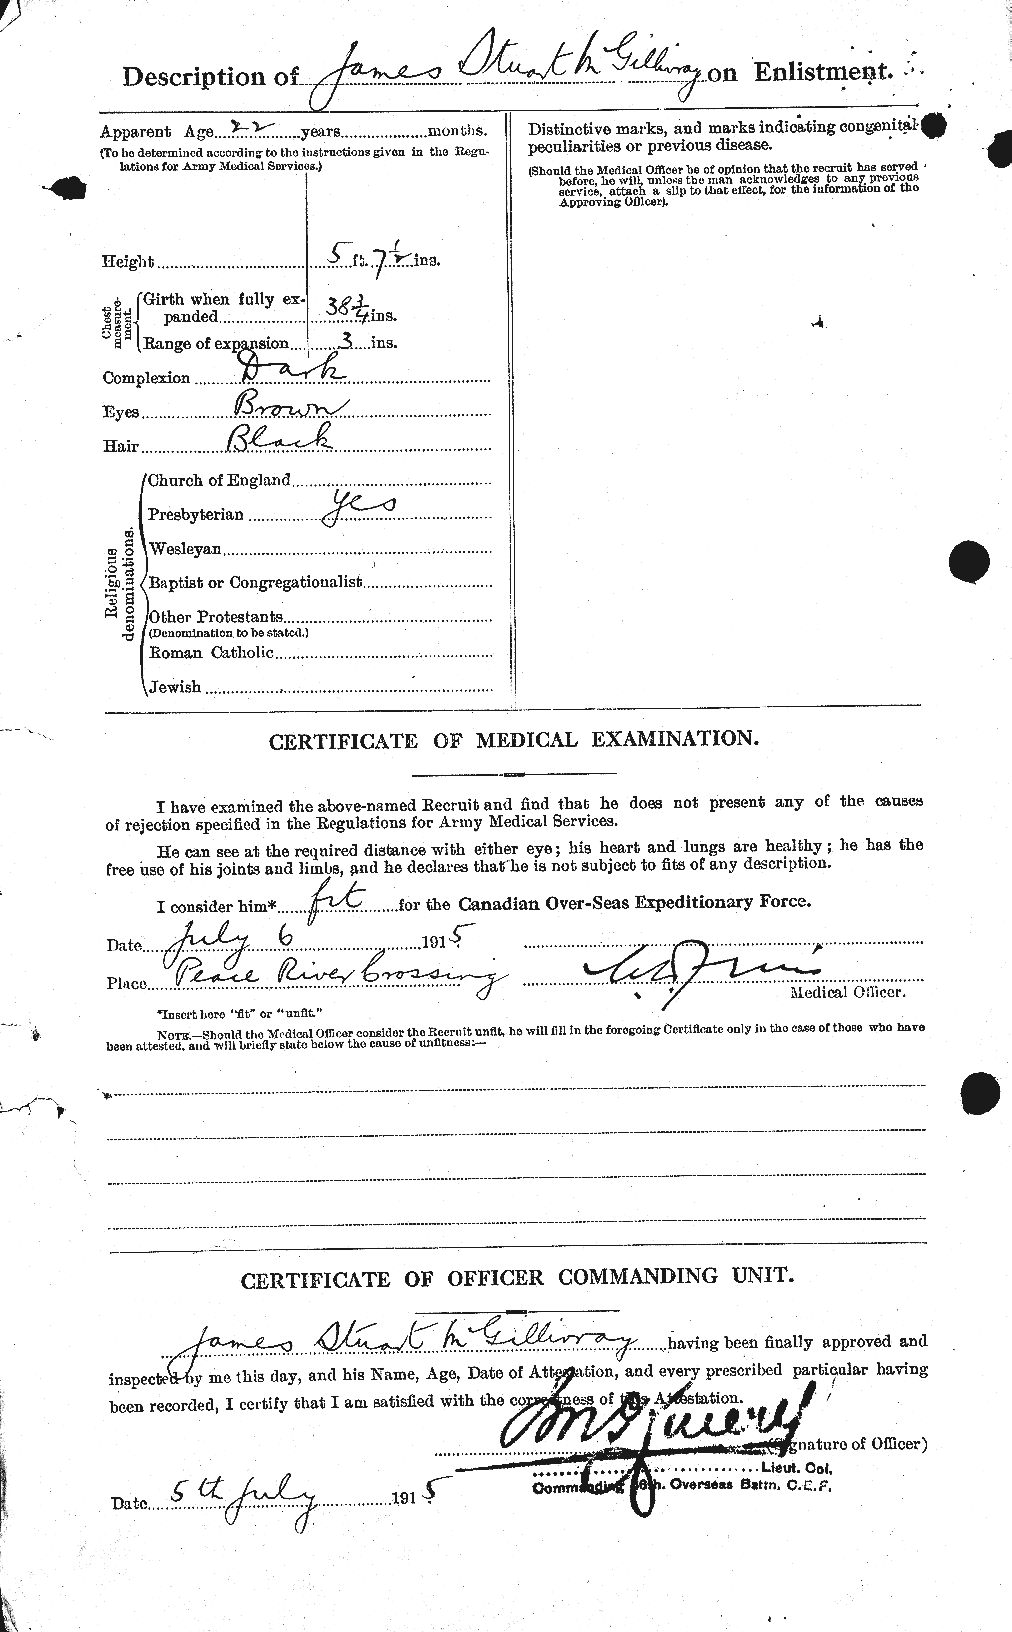 Personnel Records of the First World War - CEF 525471b